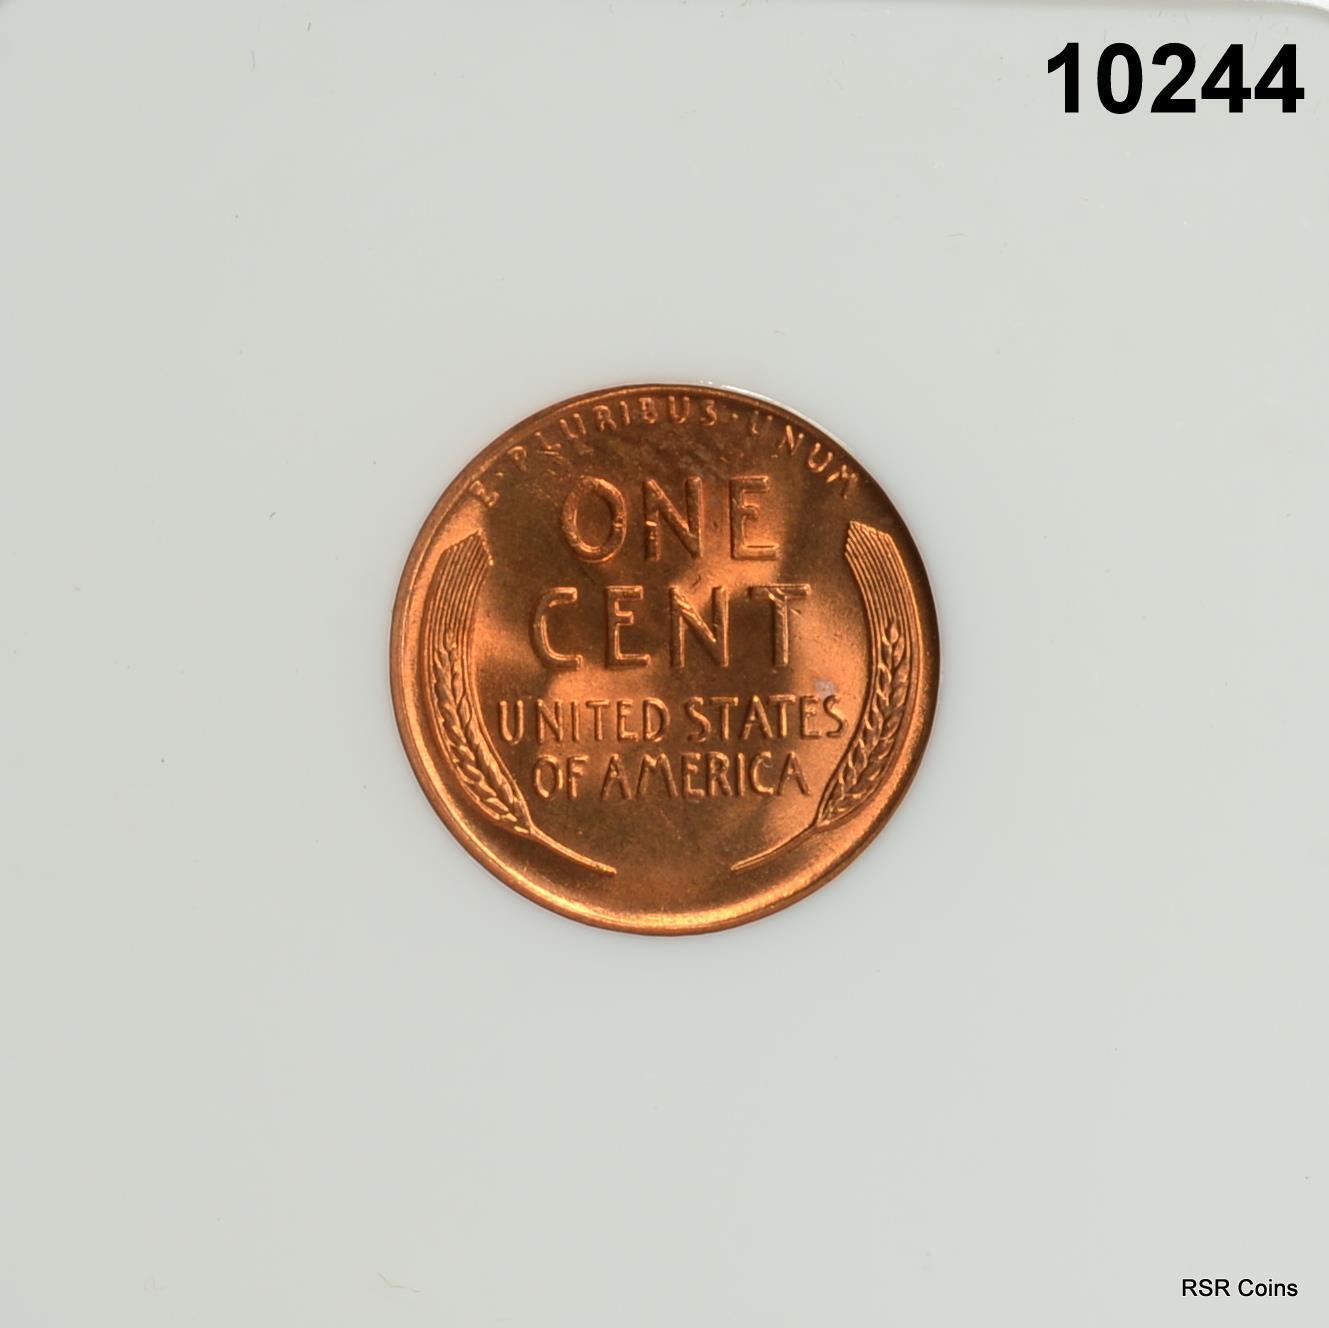 1955 S LINCOLN CENT NGC CERTIFIED MS67 RD FULL RED GEM! #10244